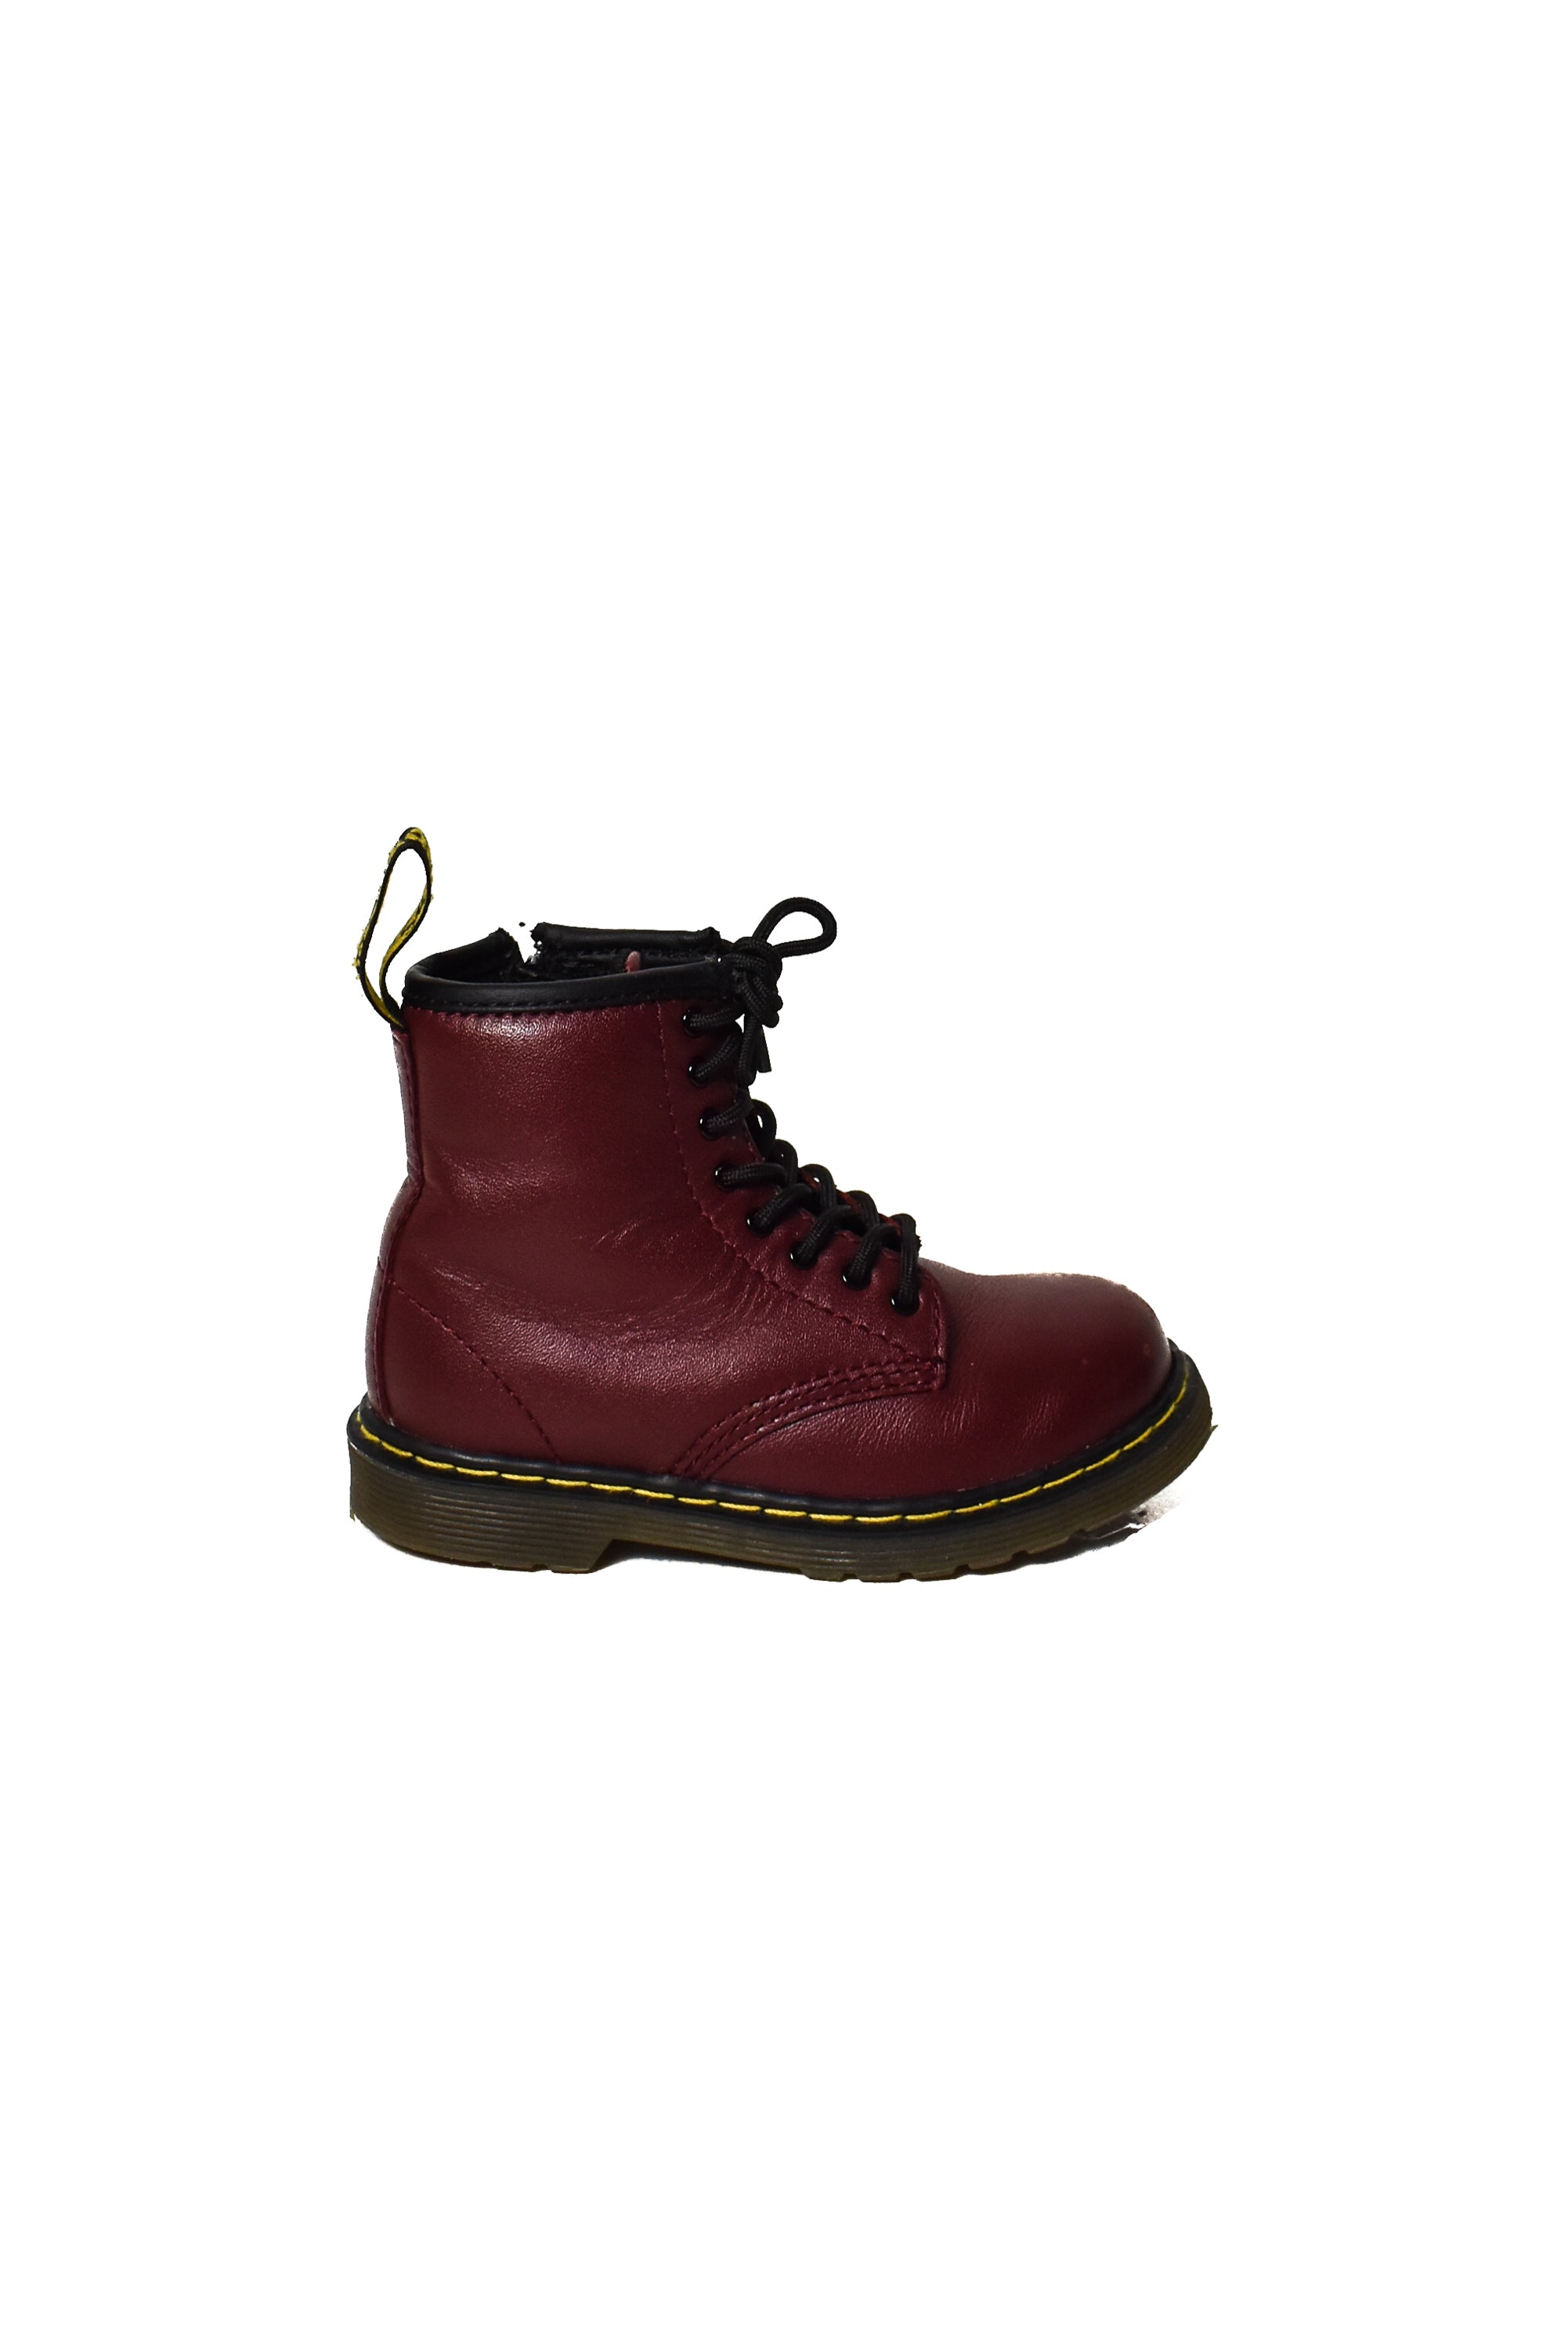 Dr. Martens at up to 90% off at Retykle